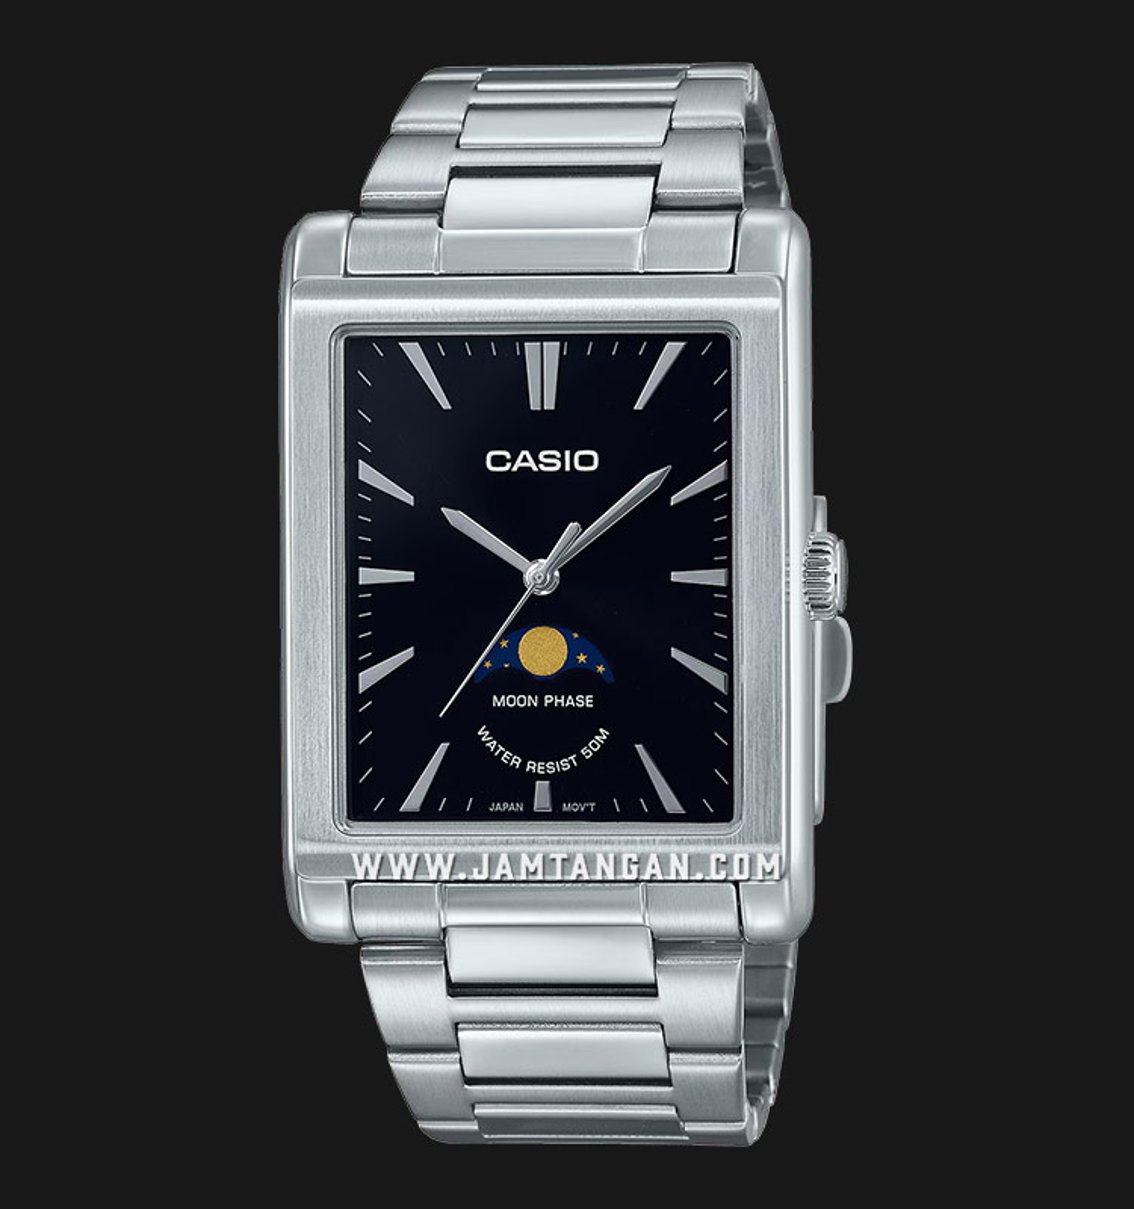 Casio General MTP-M105D-1AVDF Moonphase.